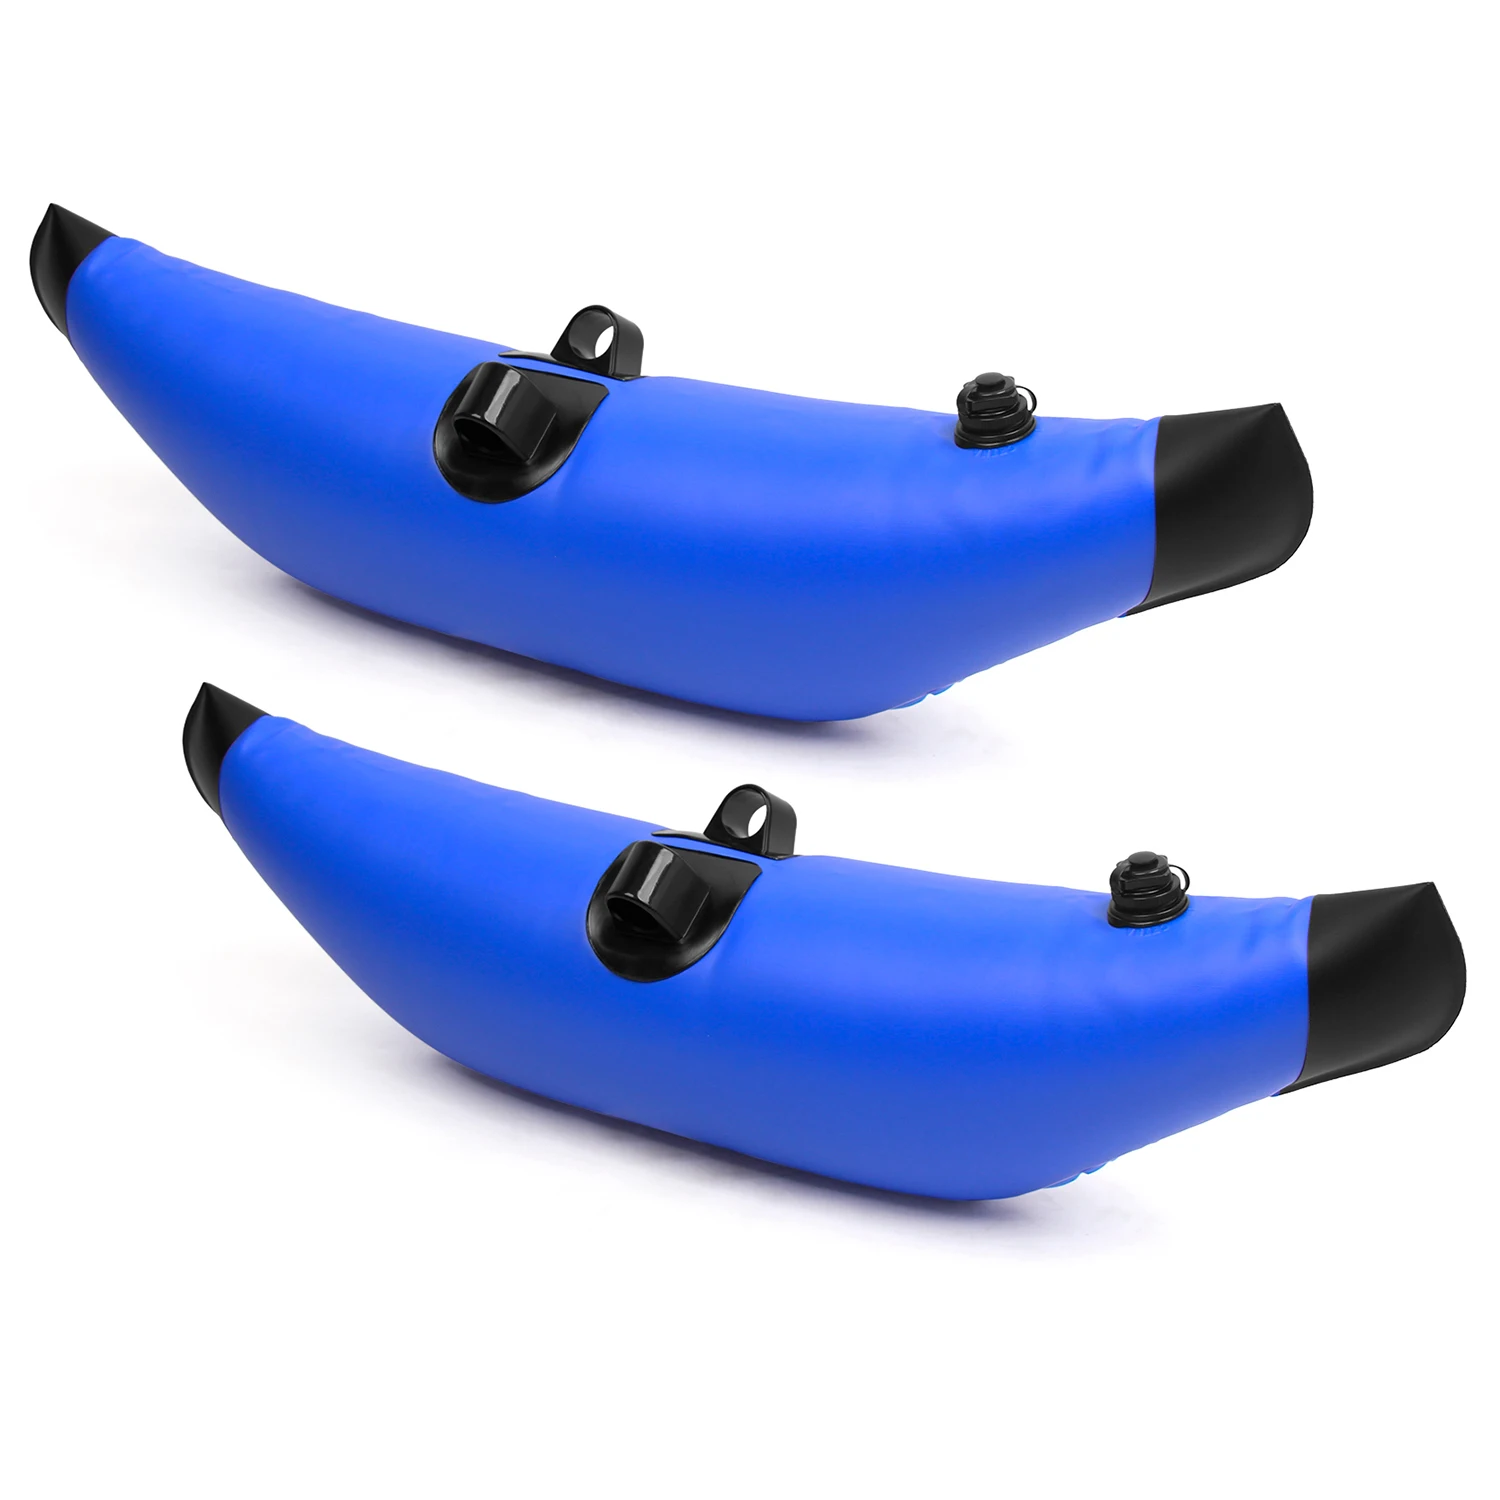 https://ae01.alicdn.com/kf/Hdf118ad51be44115bc37e02b201caa3cF/Kayak-Float-Kayak-PVC-Inflatable-Outrigger-Float-with-Sidekick-Arms-Rod-Kayak-Boat-Fishing-Standing-Float.jpg